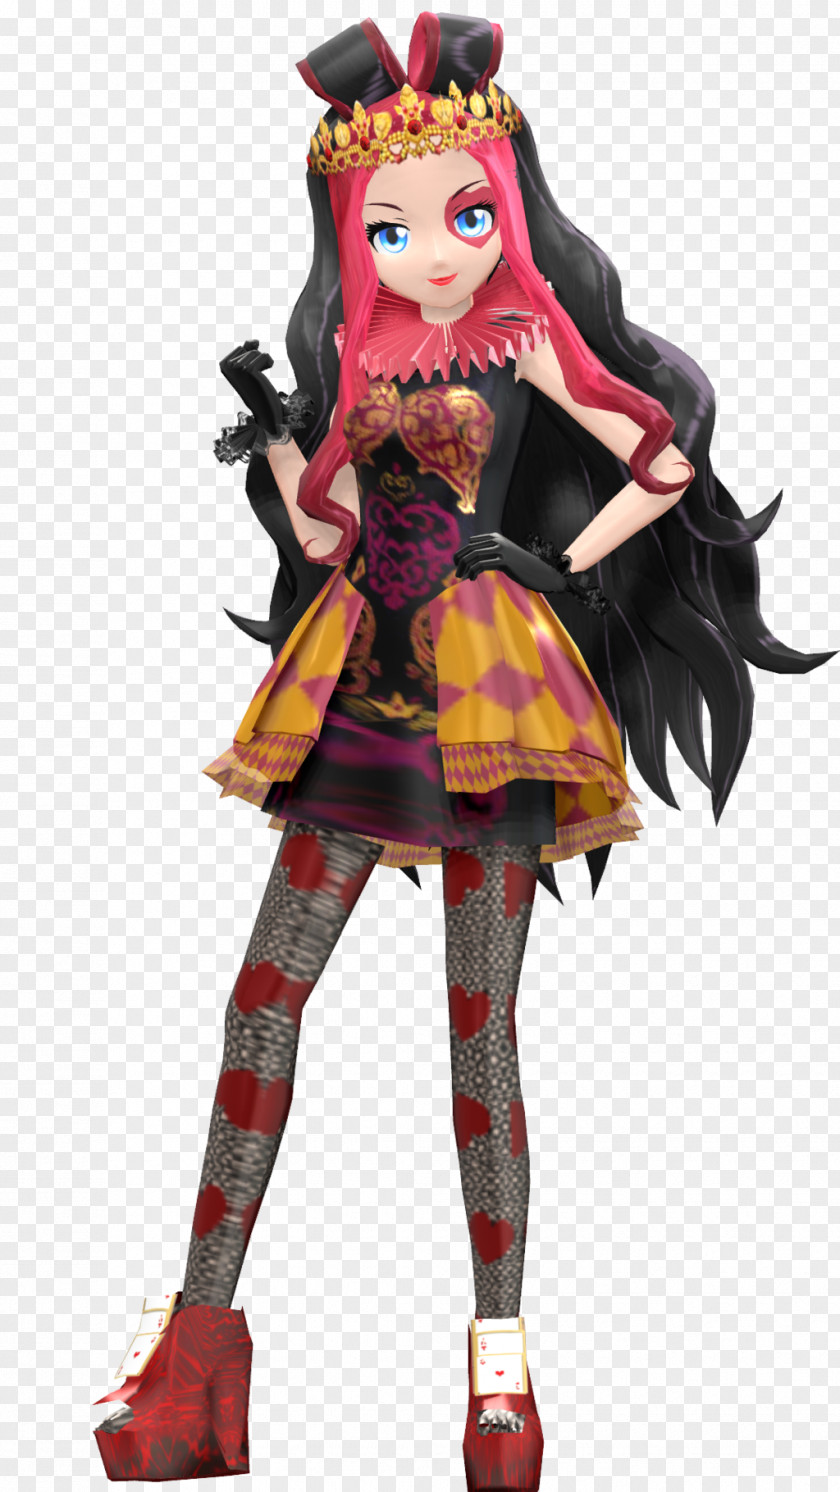 Queen Of Hearts Cheshire Cat Ever After High Alice's Adventures In Wonderland PNG